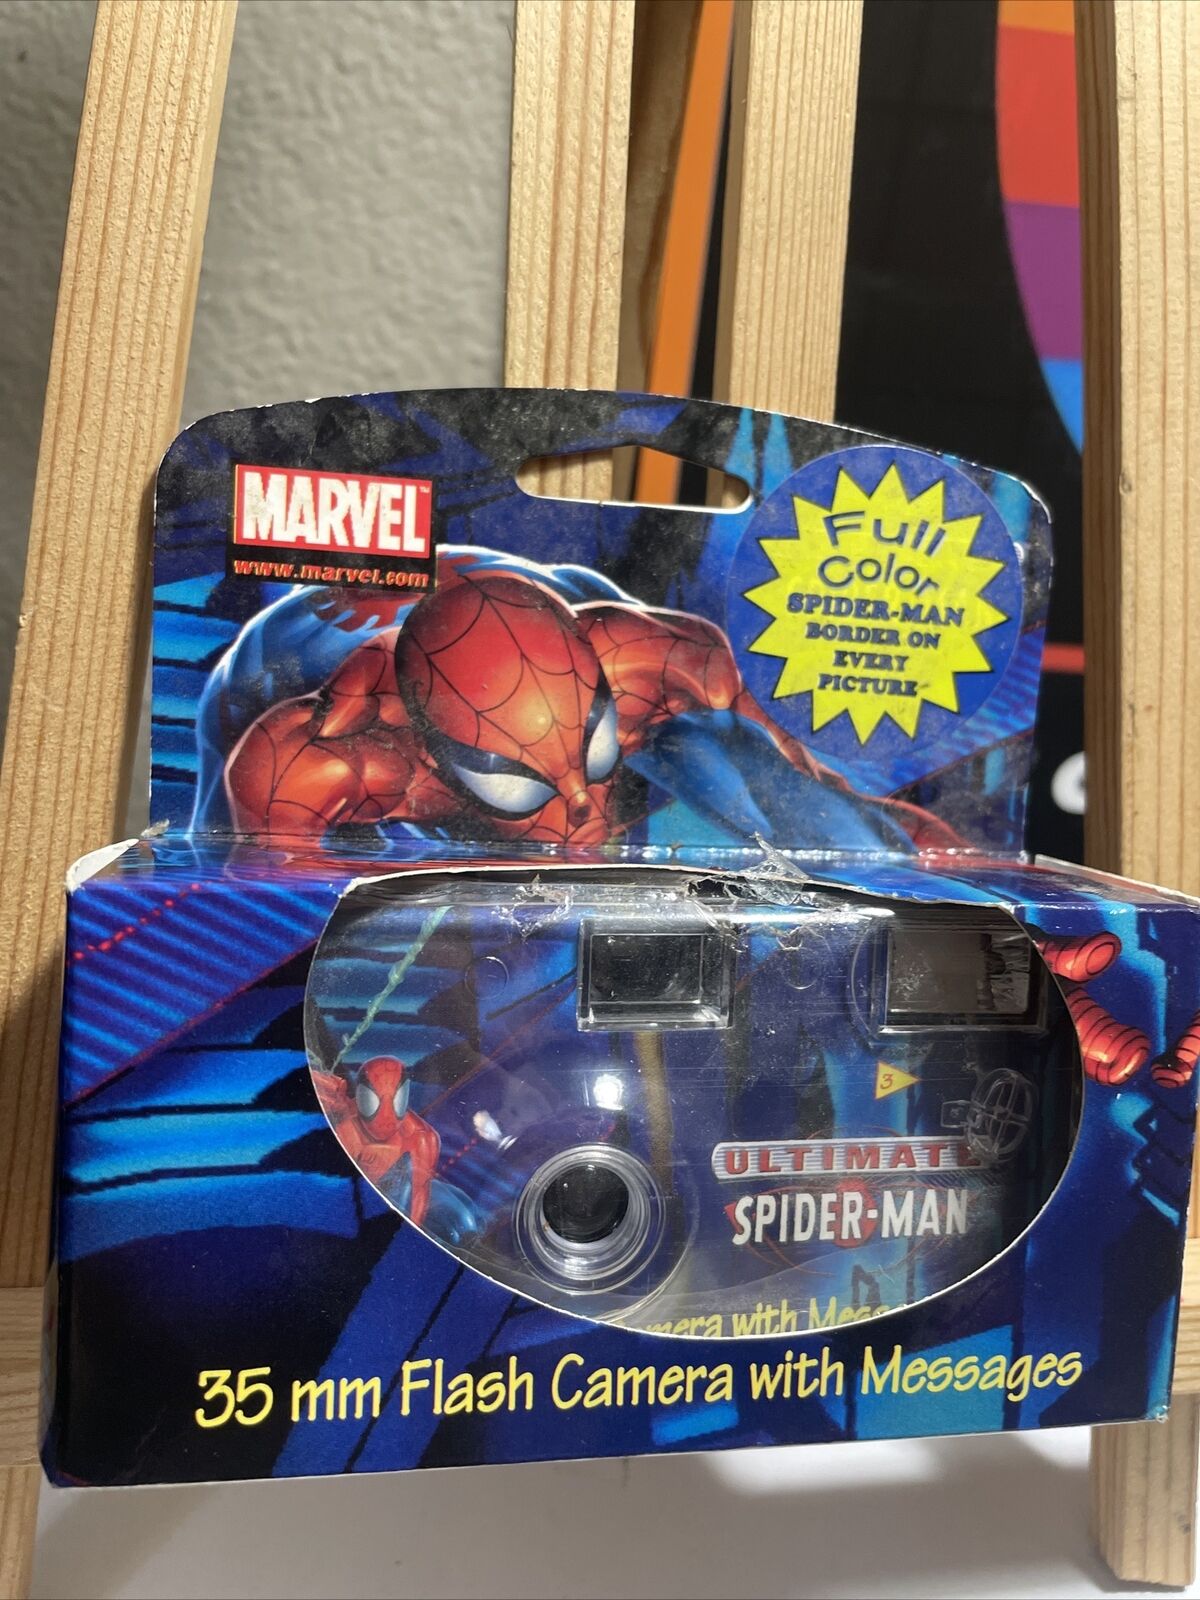  2002 Sealed New Marvel Spiderman Flash Camera 35MM With Messages